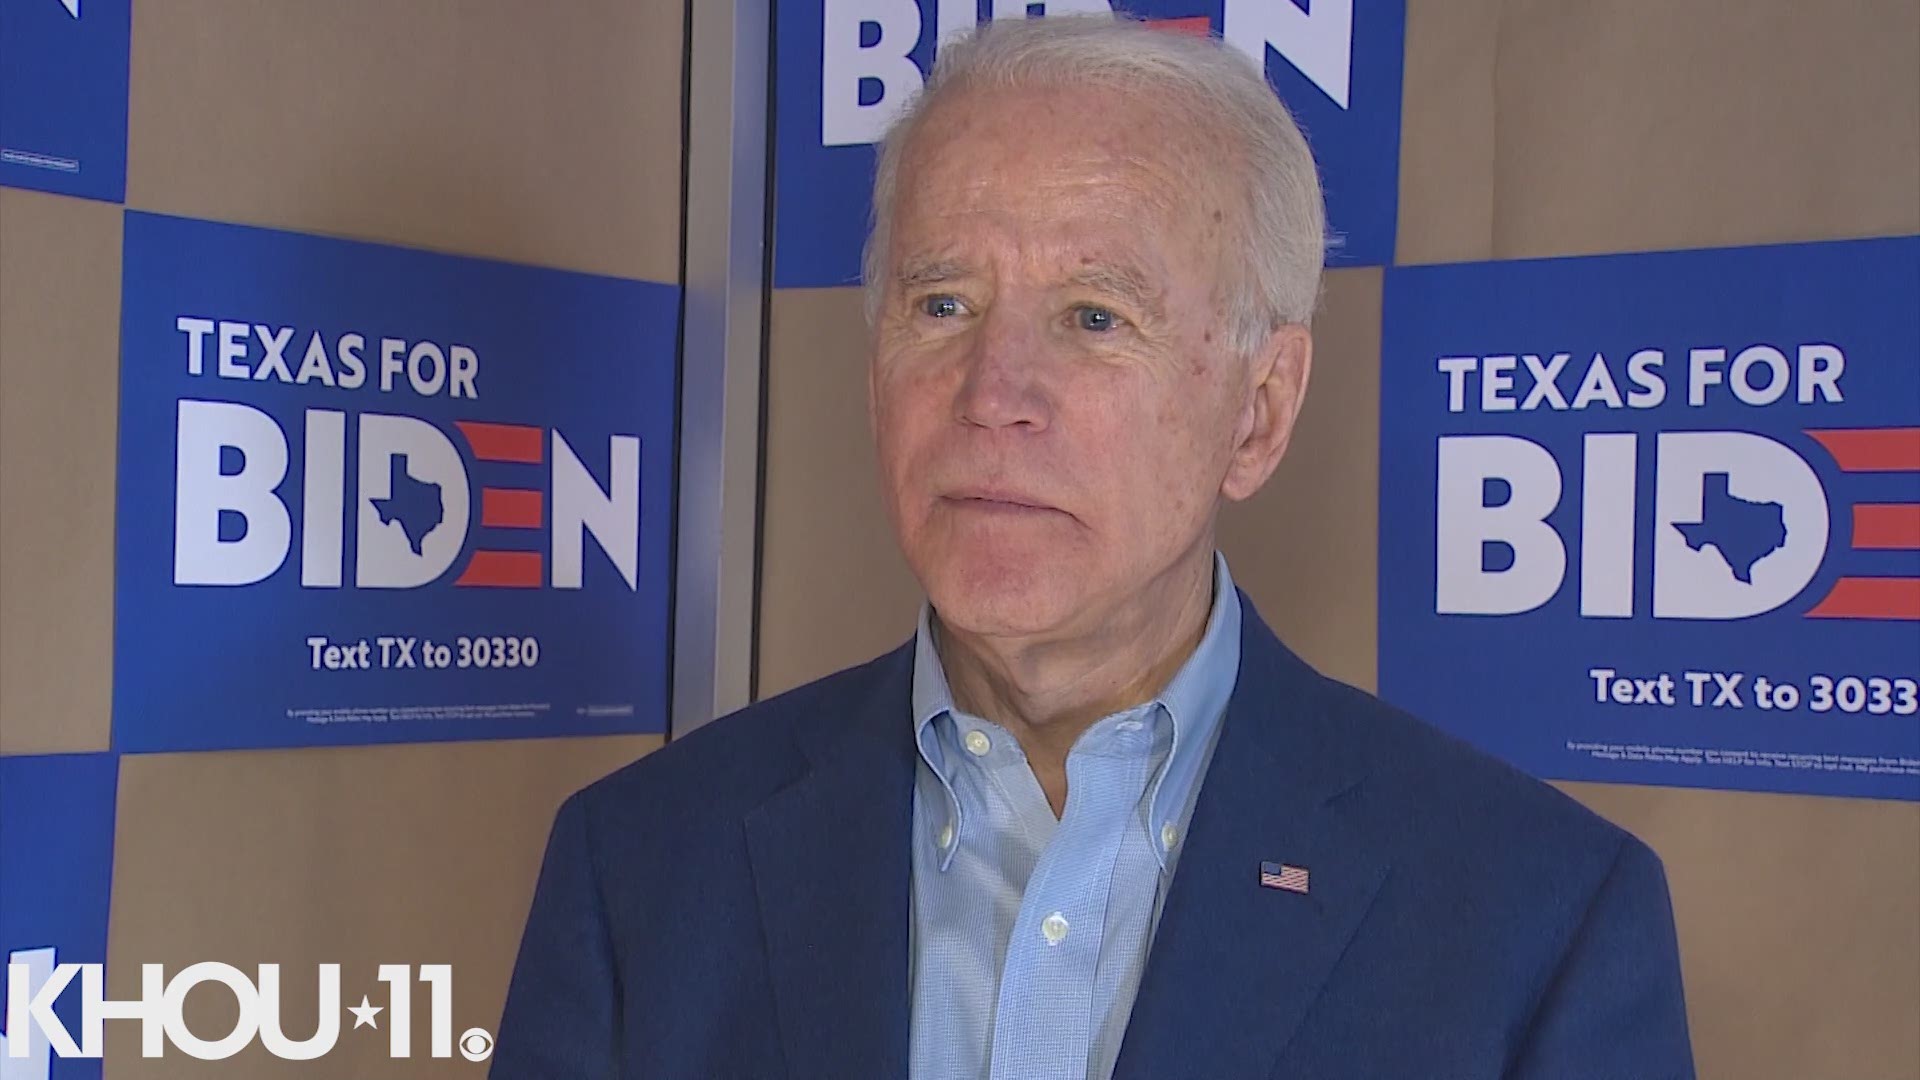 KHOU 11 caught up with Joe Biden during his visit to Houston ahead of Super Tuesday.